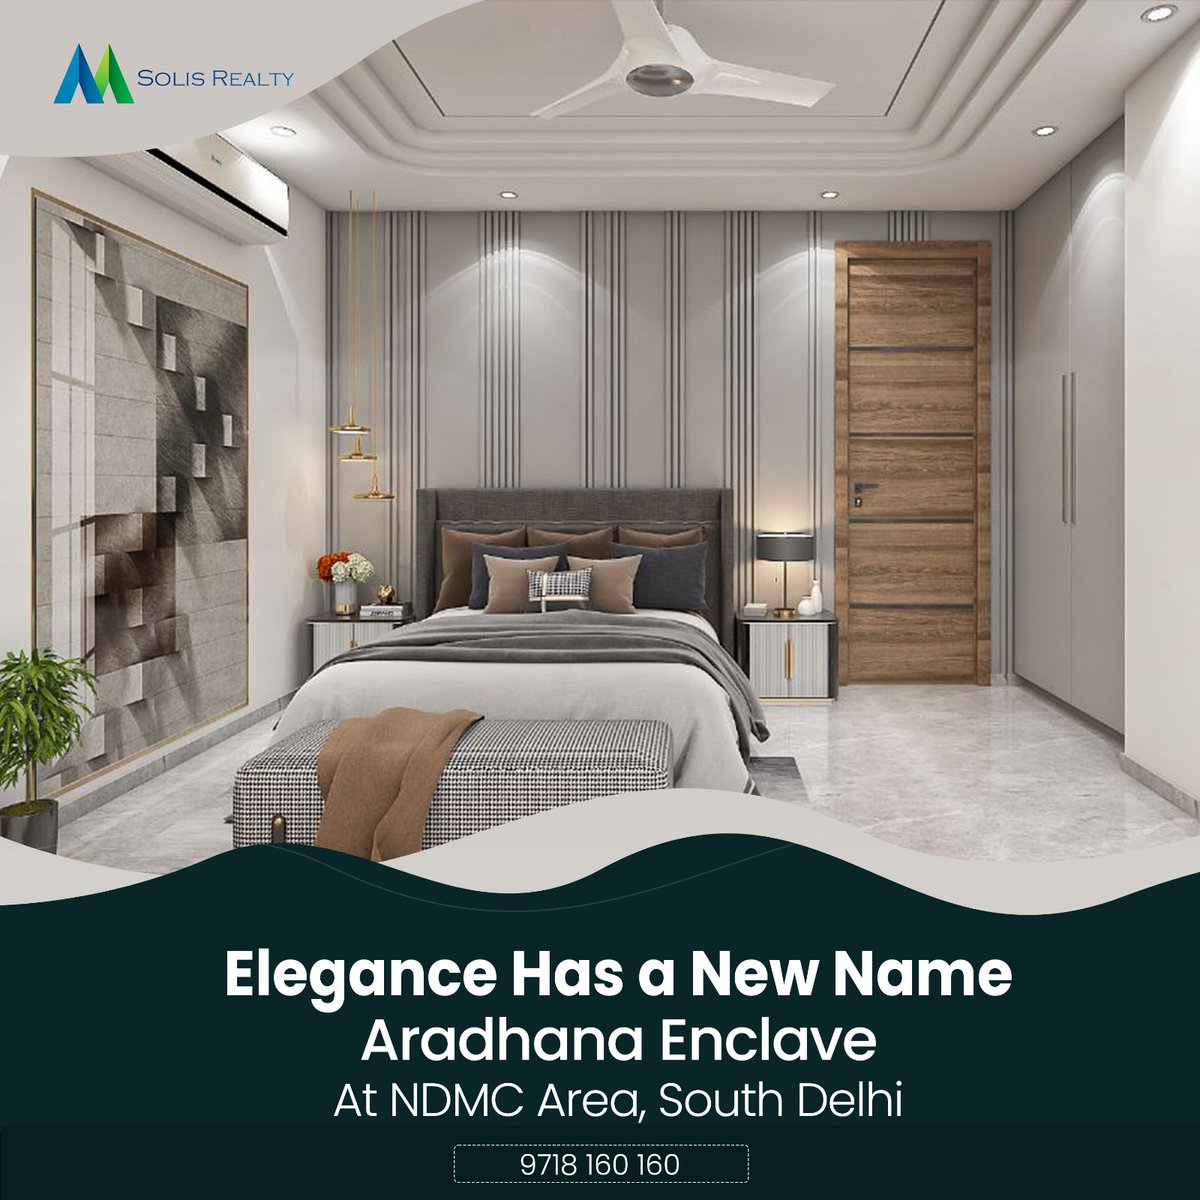 #AradhanaEnclave At #NDMC Area, #SouthDelhi

Elegantly Designed #Floors For Privacy and Peace. 

#Book Your #Apartment Today to Avail of Exciting #Discounts.

Call: 9718160160 #SolisRealty

#homes #newhomes #luxuryhomes #flats #furnishedflats #semfurnishedflats